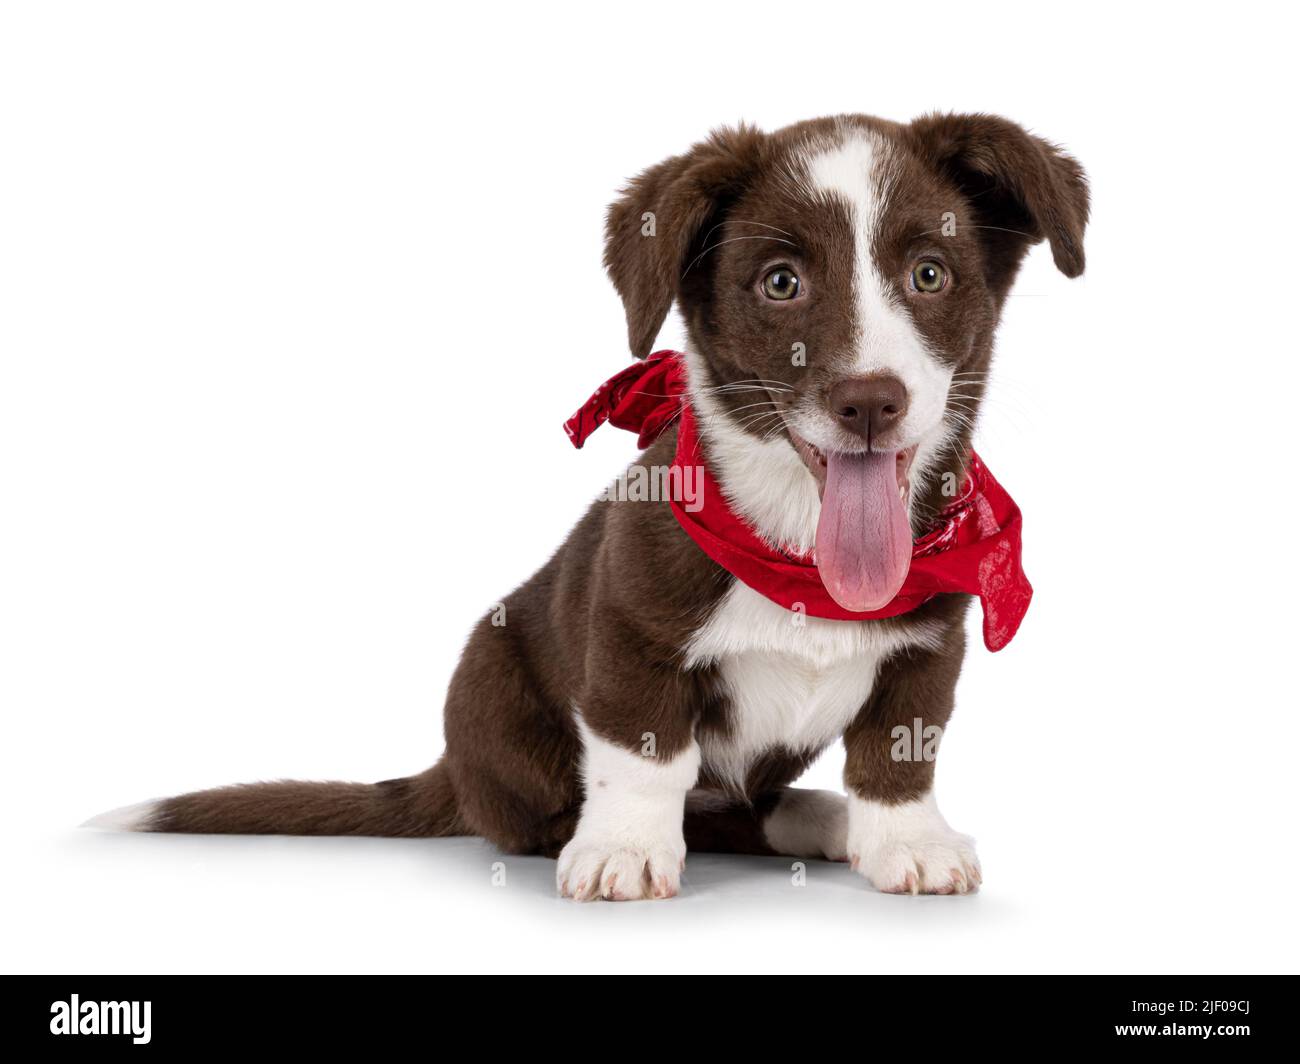 Cute brown with white Welsh Corgi Cardigan dog pup, sitting up wearing red scarf. Looking towards camera. Isolated on a white background. Mouth open, Stock Photo